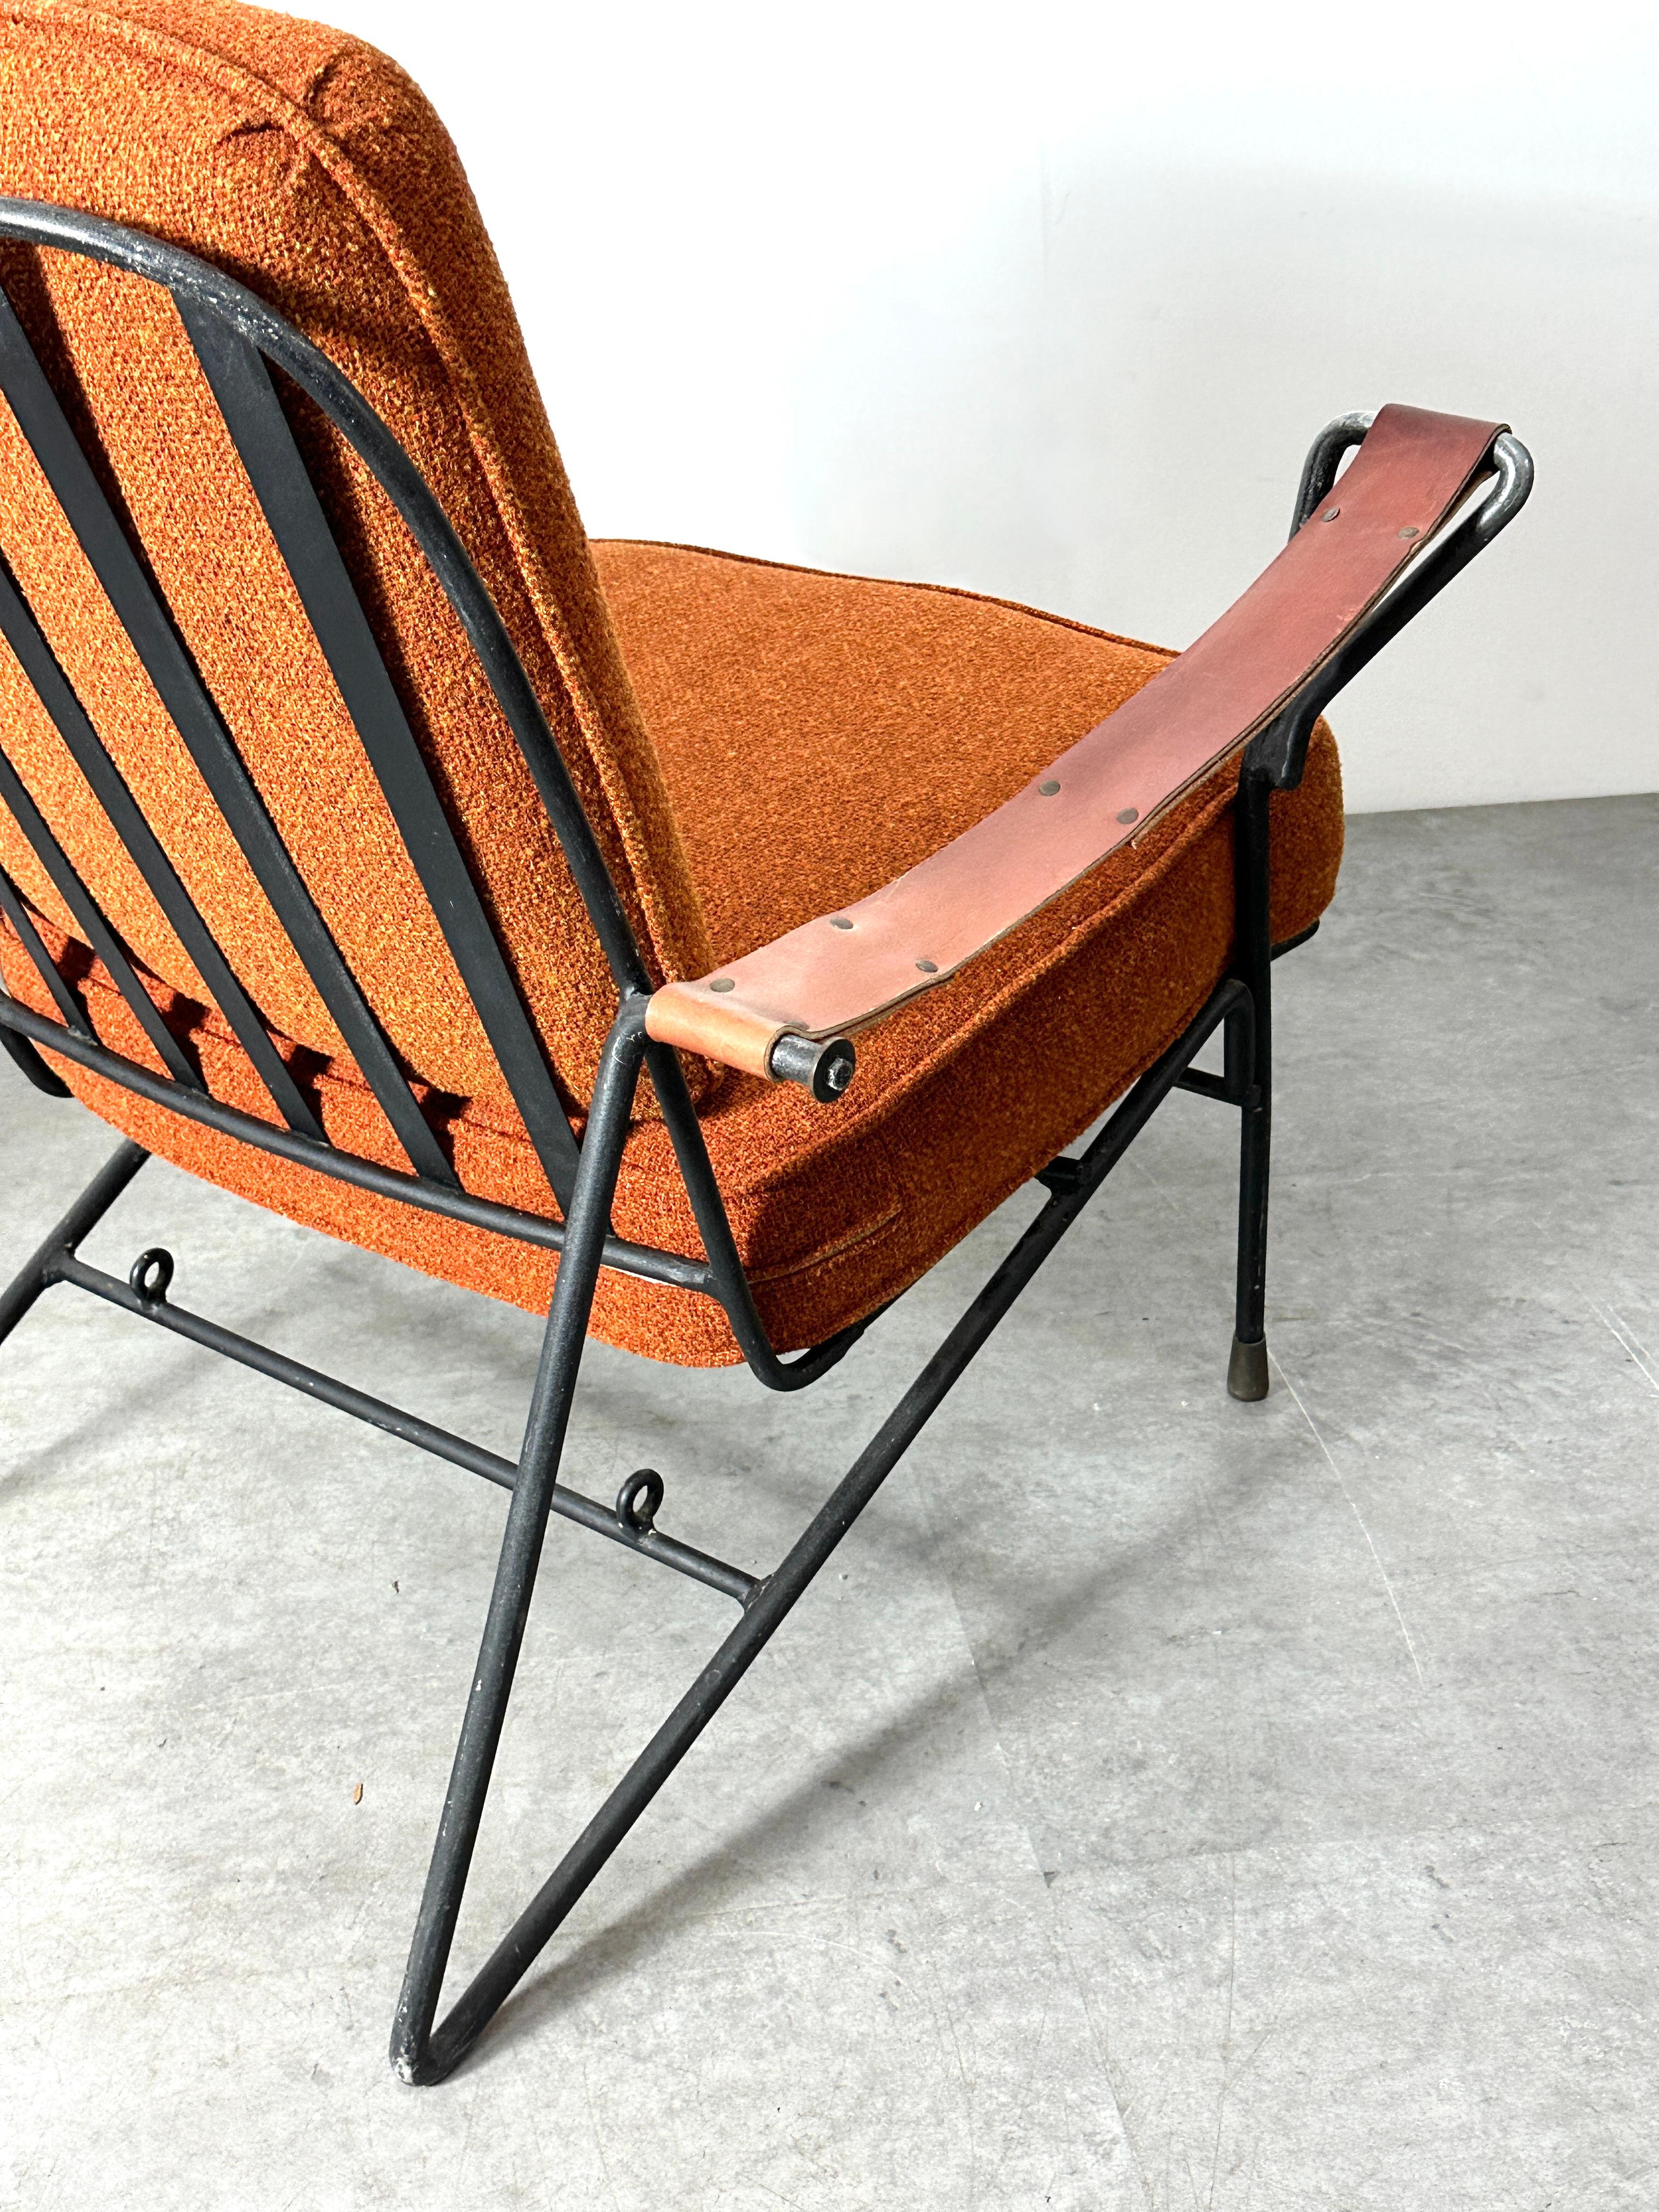 A Pair of Vintage Mid Century Mexican Modern Iron Leather Lounge Chairs 1950s For Sale 2